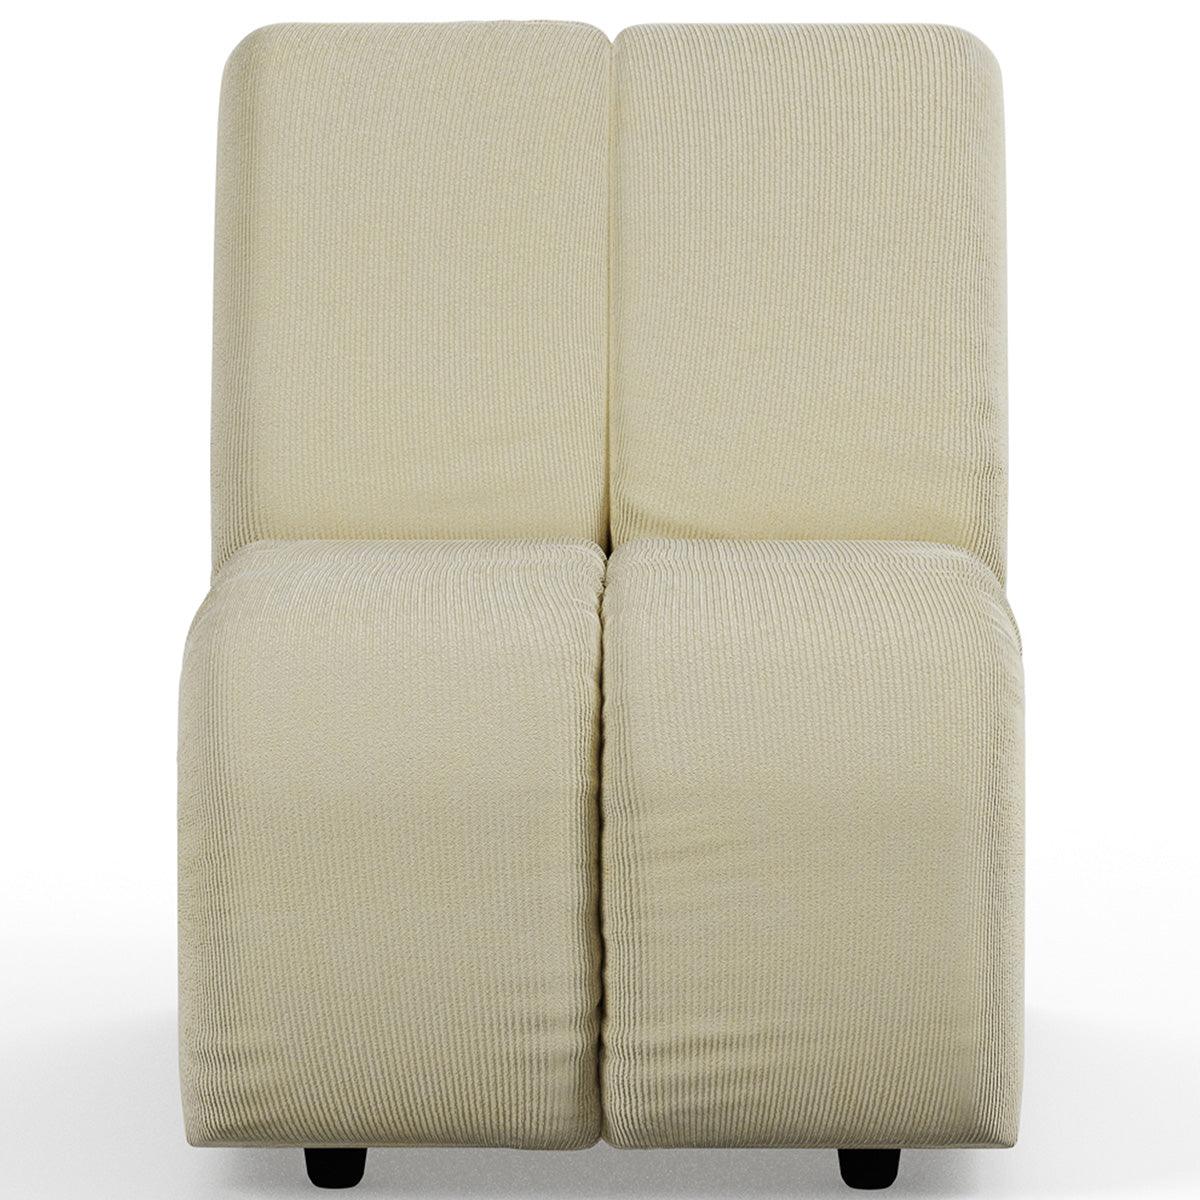 Wave Corduroy Rib Couch - Element Middle Small - WOO .Design